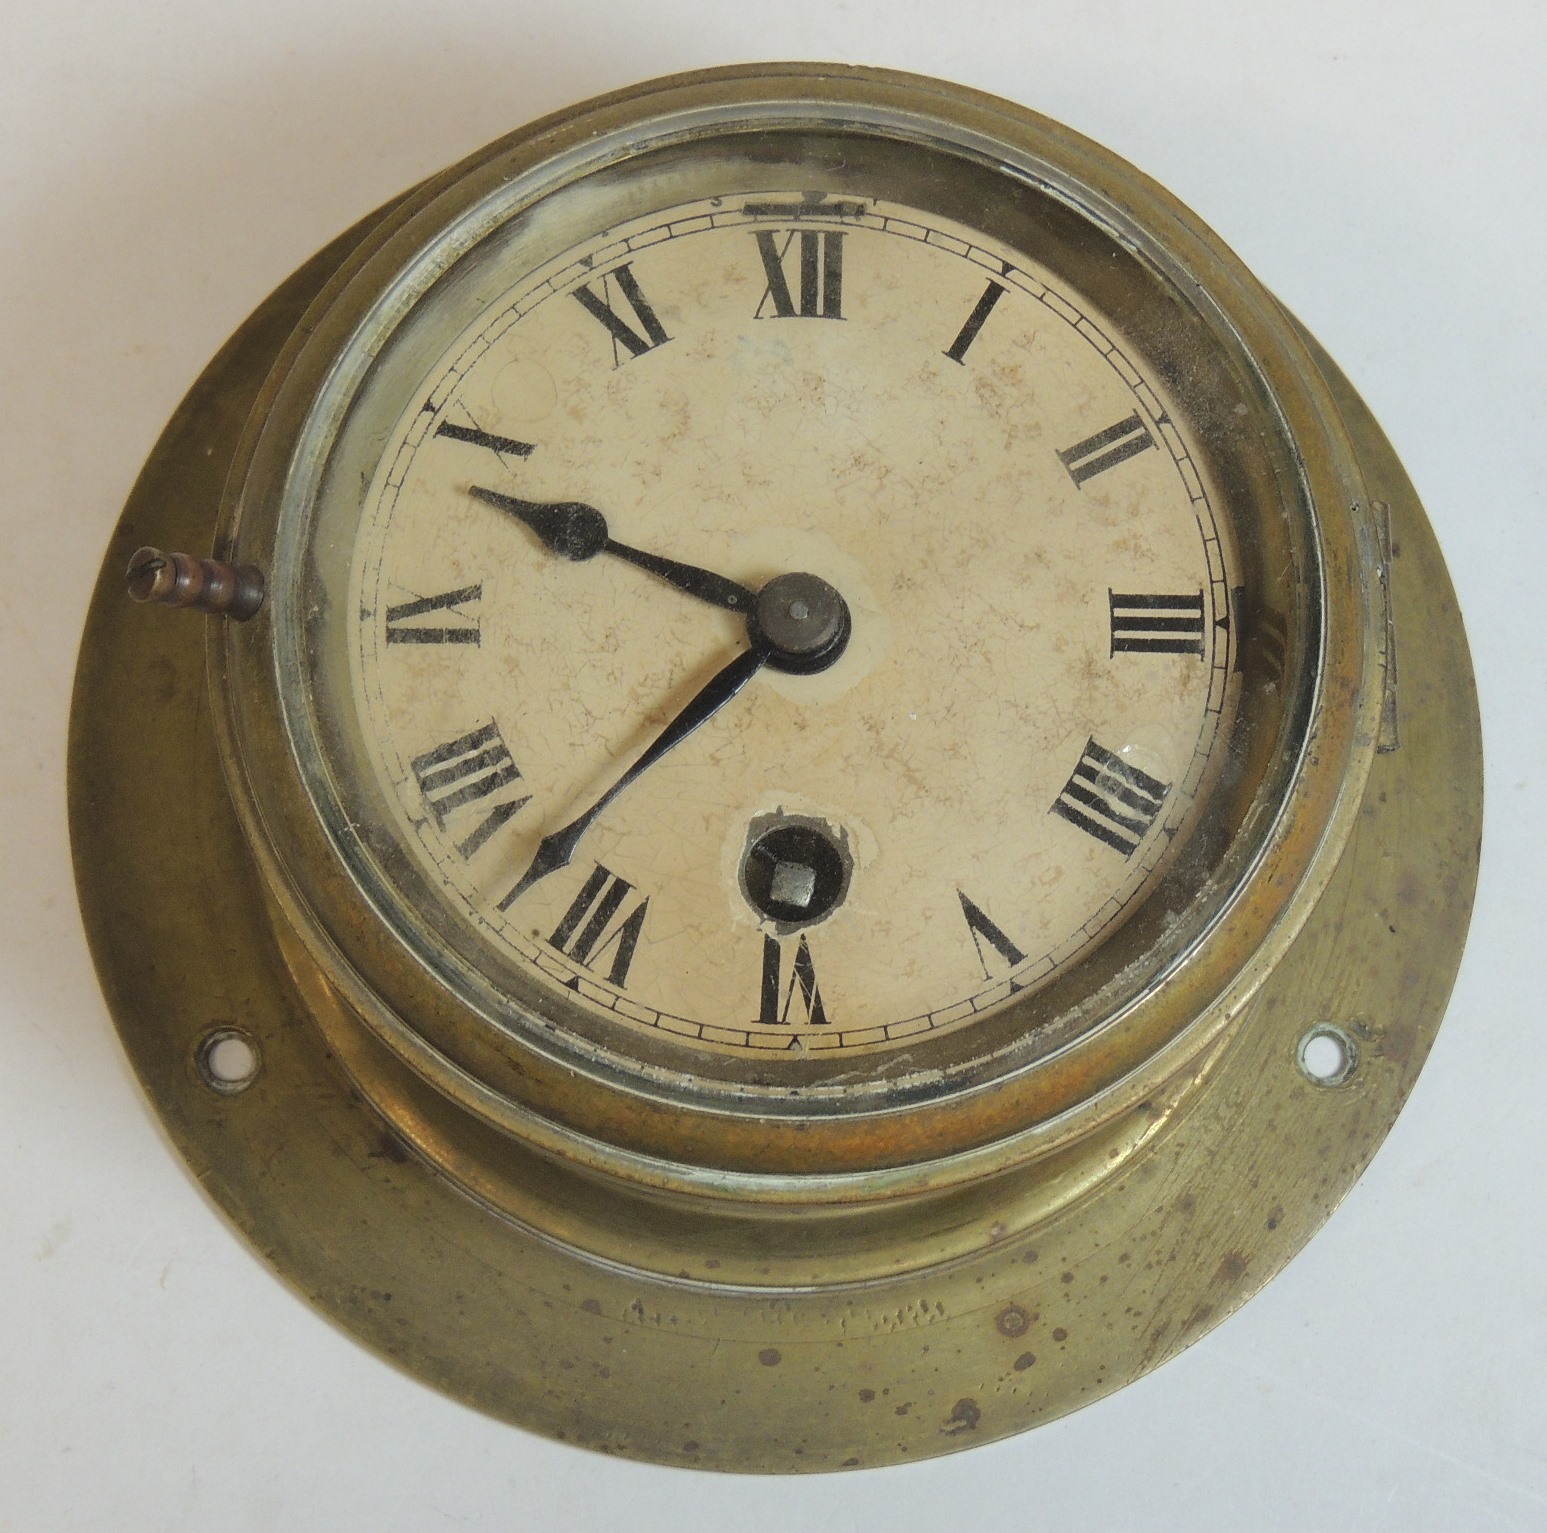 A WWII period bulkhead timepiece having white dial with black Roman numerals and brass casing,